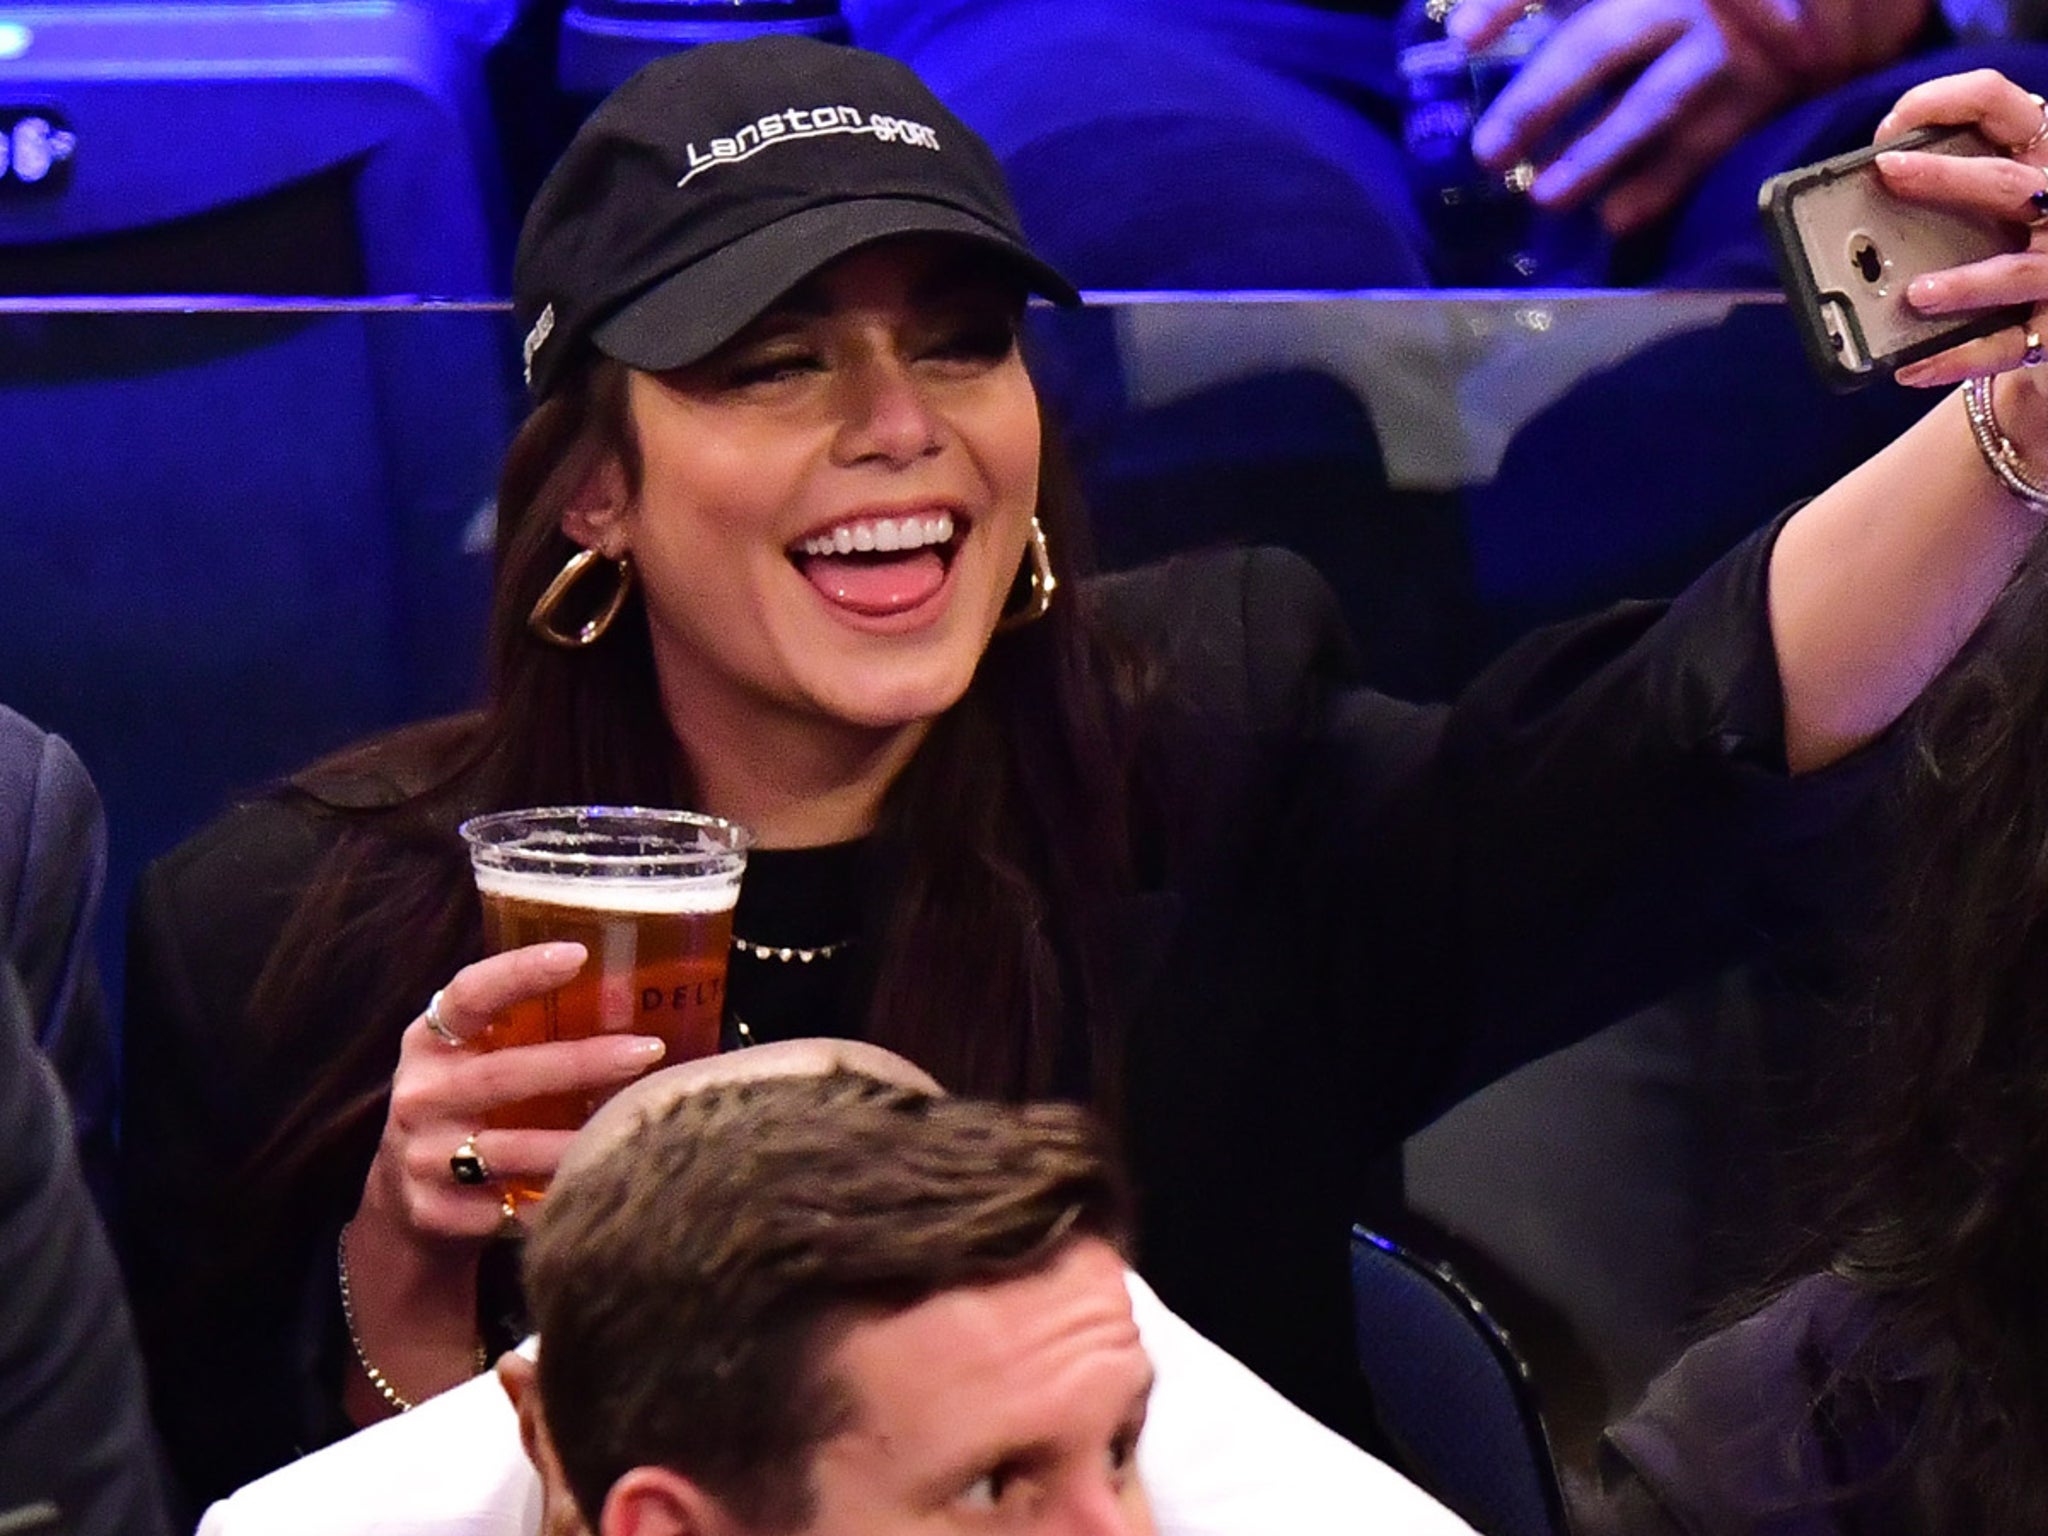 Vanessa Hudgens attends LA Lakers game to support Kyle Kuzma one day after  they were spotted on date